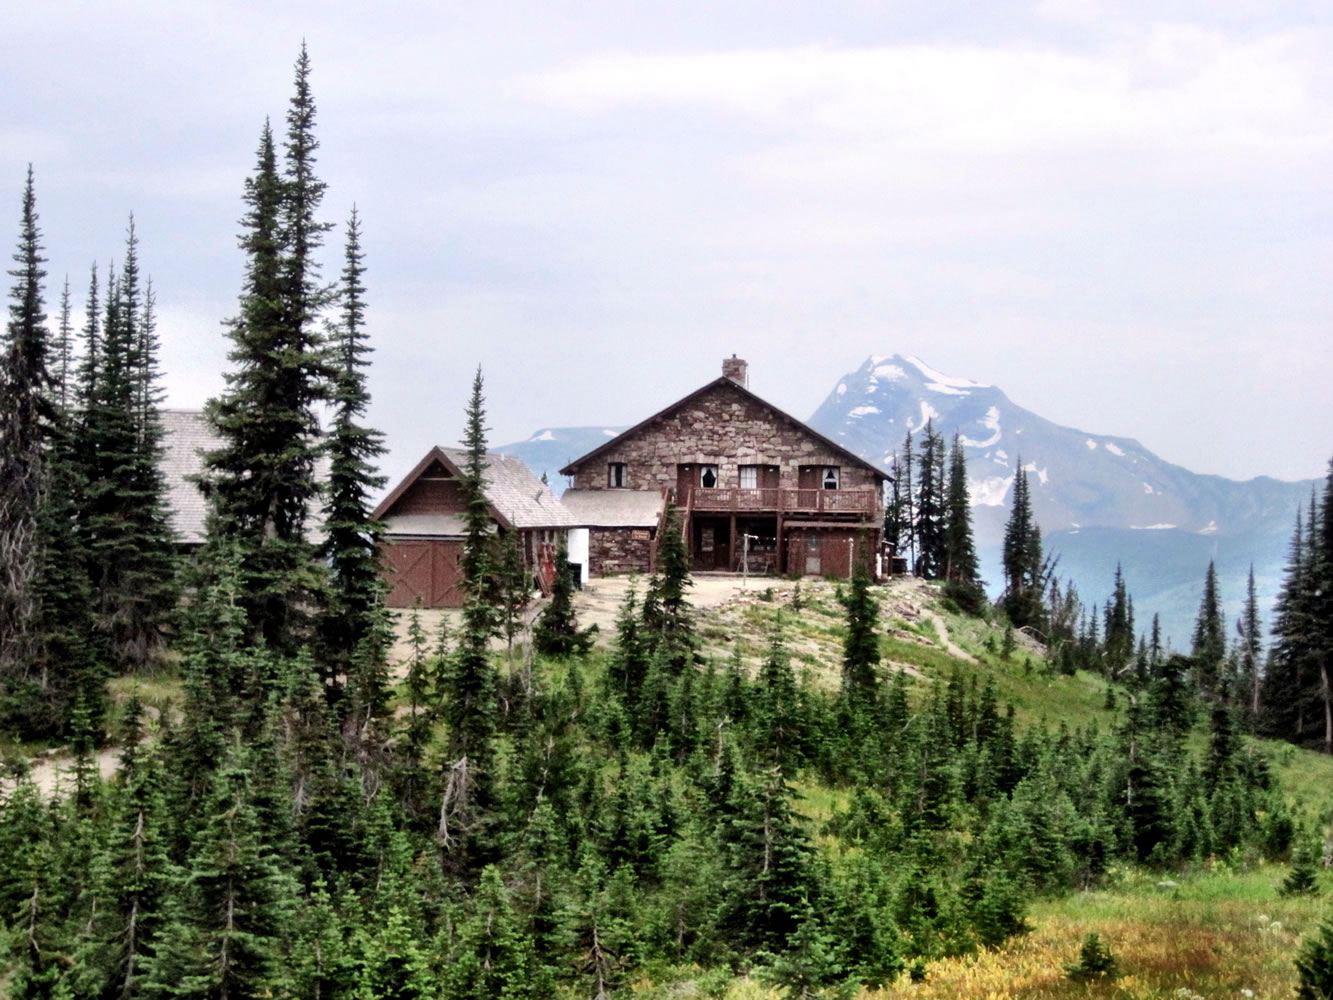 Photos by Erin Madison/The Great Falls Tribune
Granite Park Chalet sits on Heaven's Peak in Glacier National Park, Mont. Granite Park Chalet was built as part of the Great Northern Railway's &quot;See America First&quot; campaign.